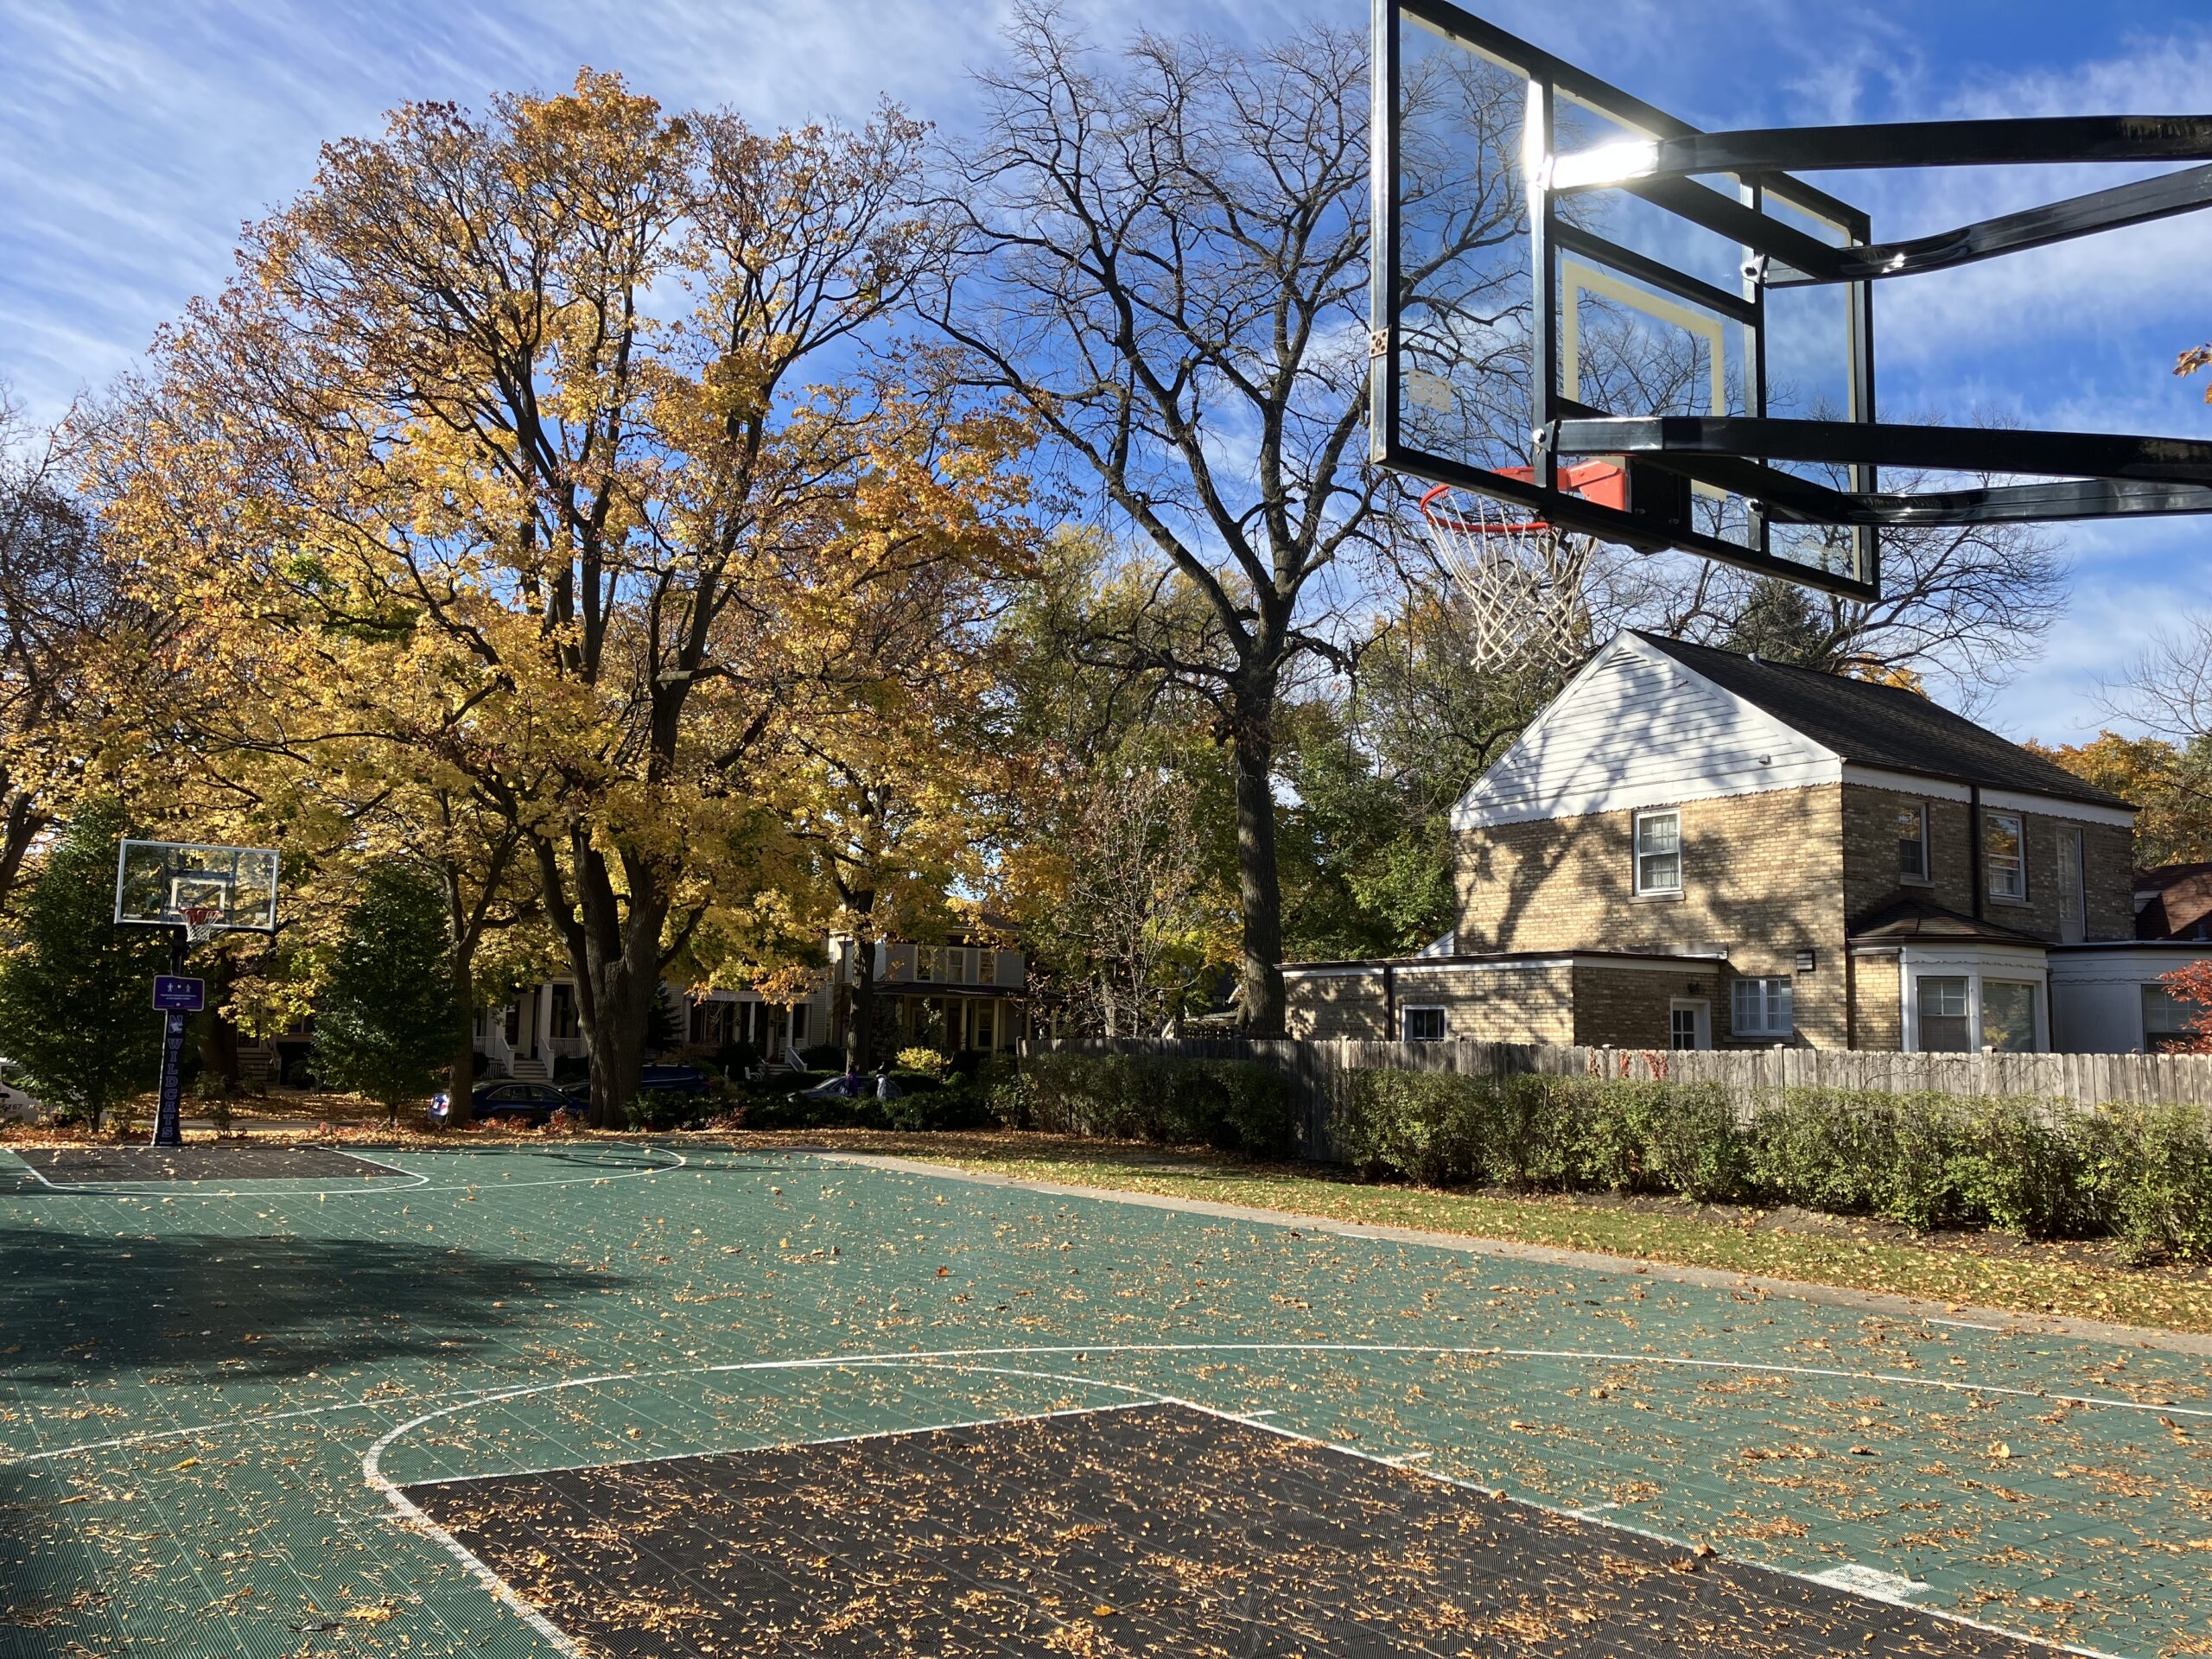 Late-night basketball games don’t play well with NU neighbors